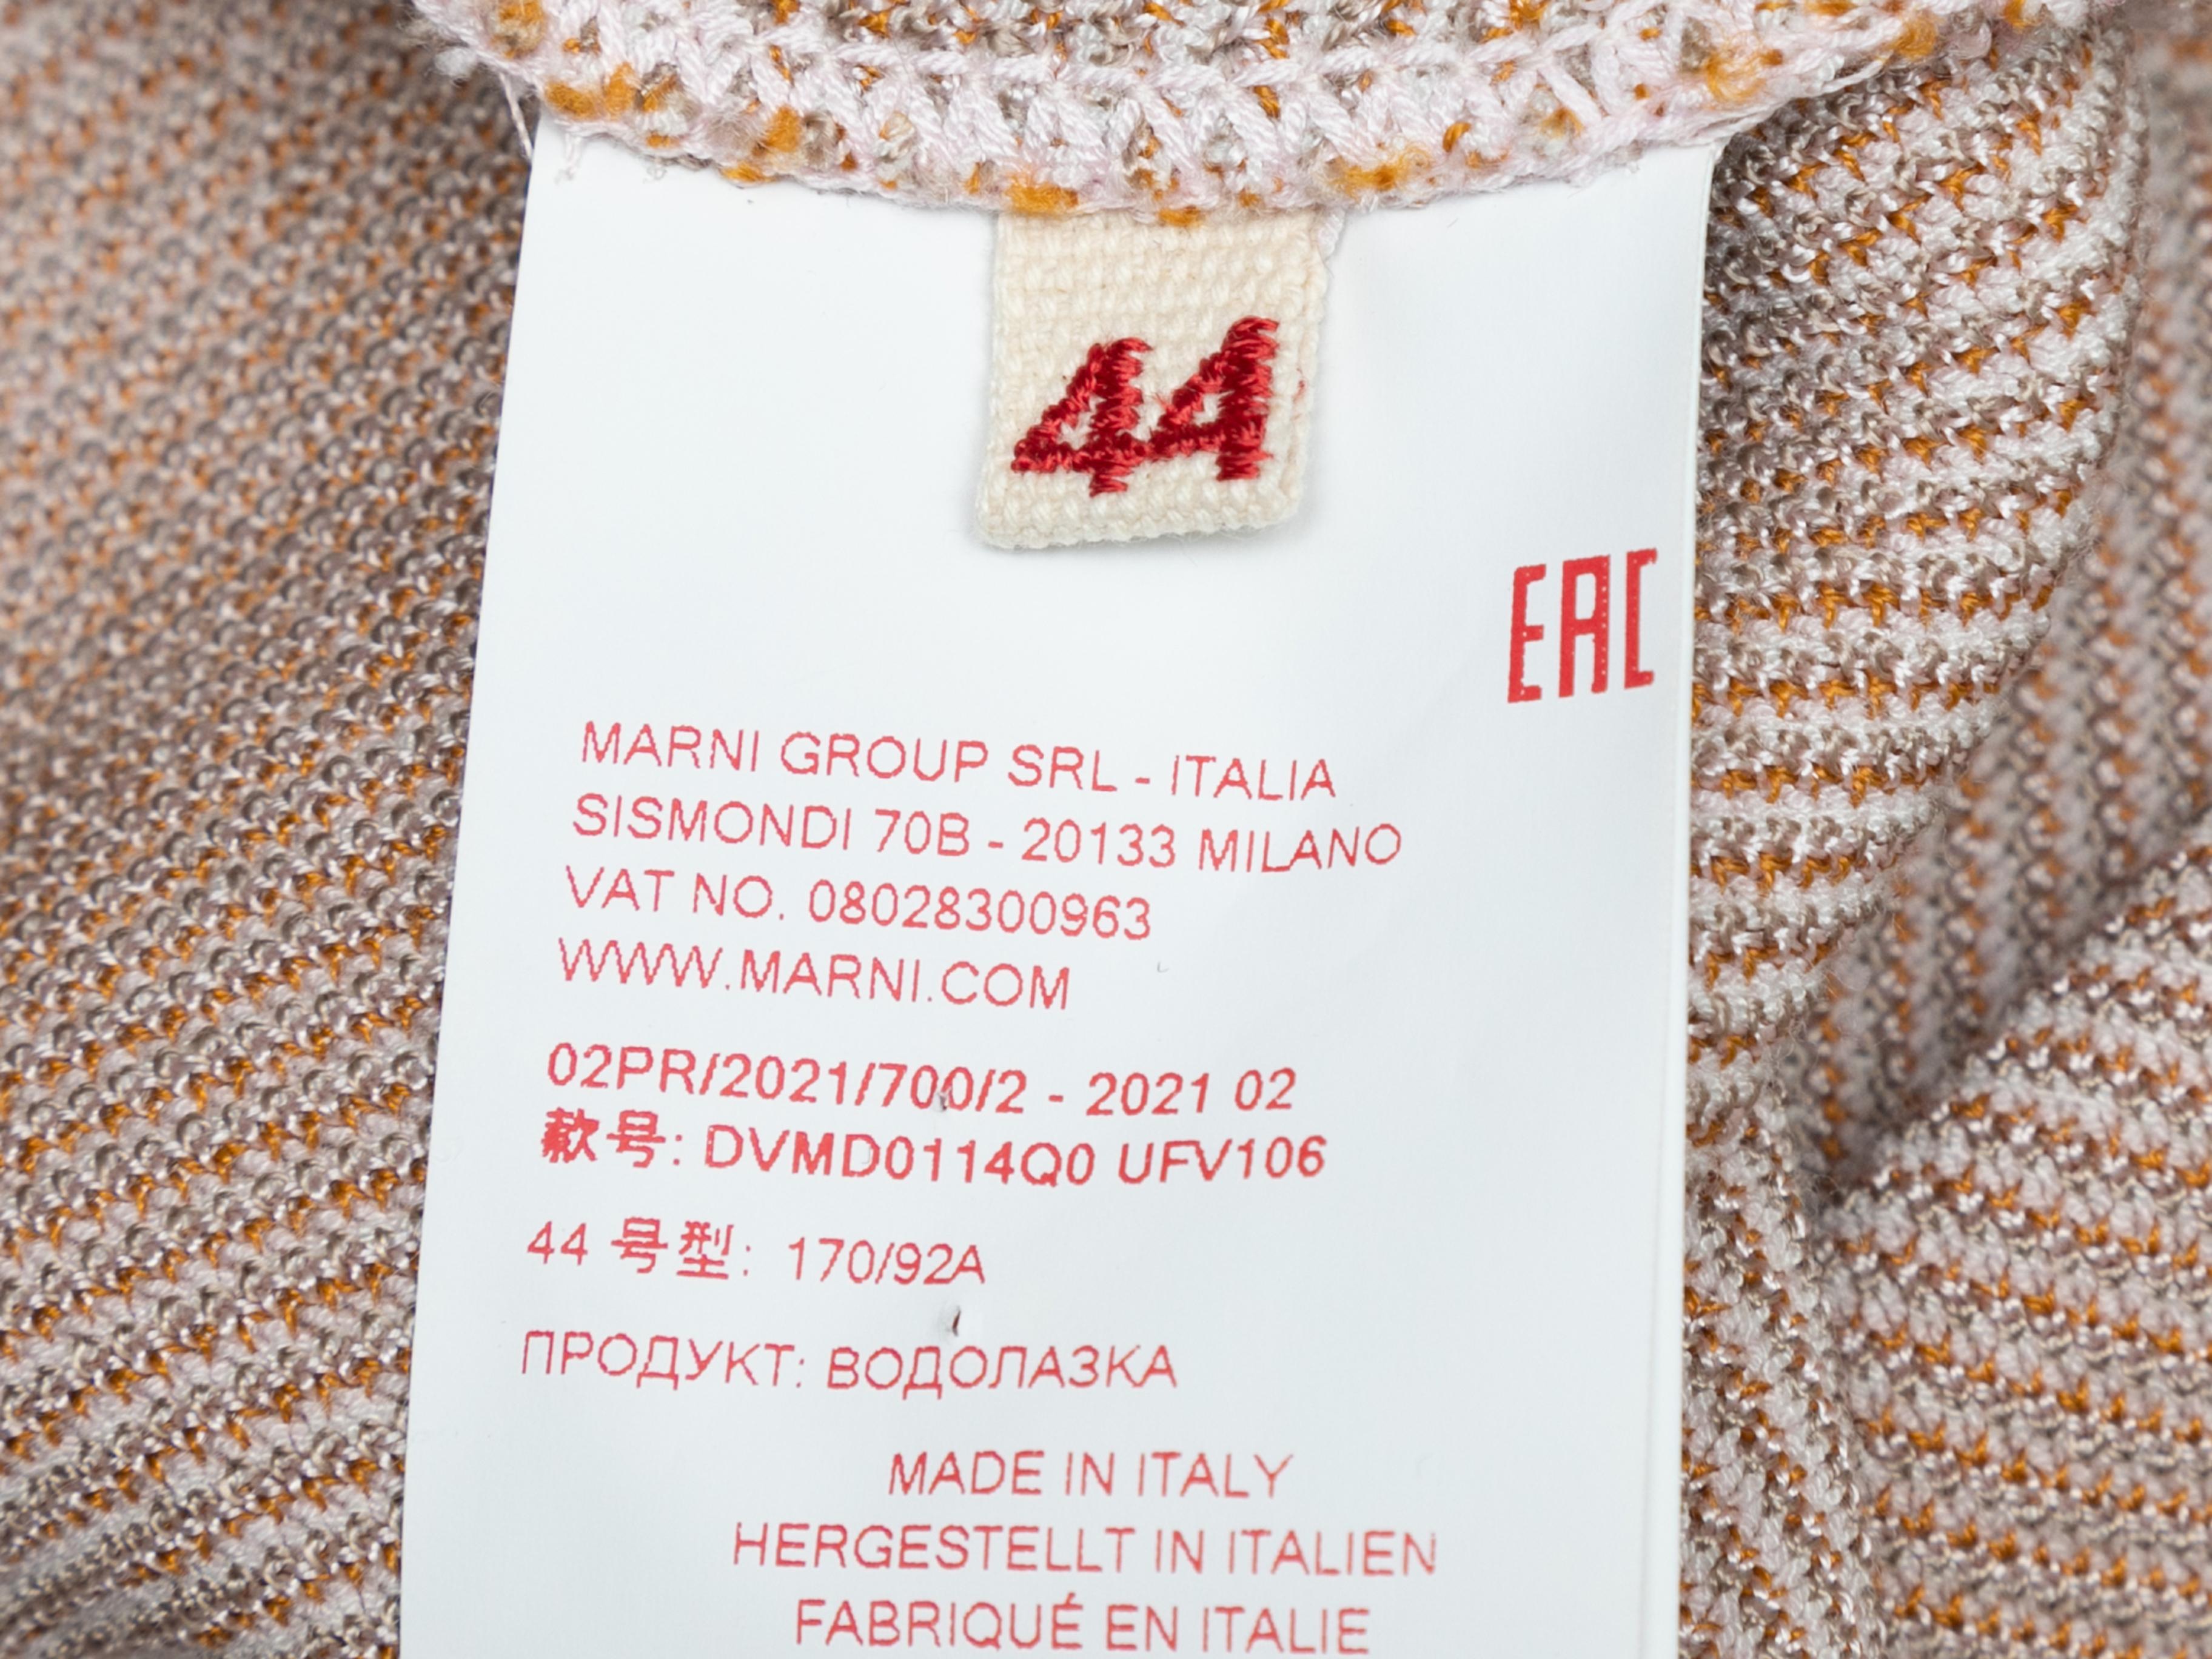 Light Pink & Orange Knit Half-Zip Sweater Size EU 44 In Good Condition For Sale In New York, NY